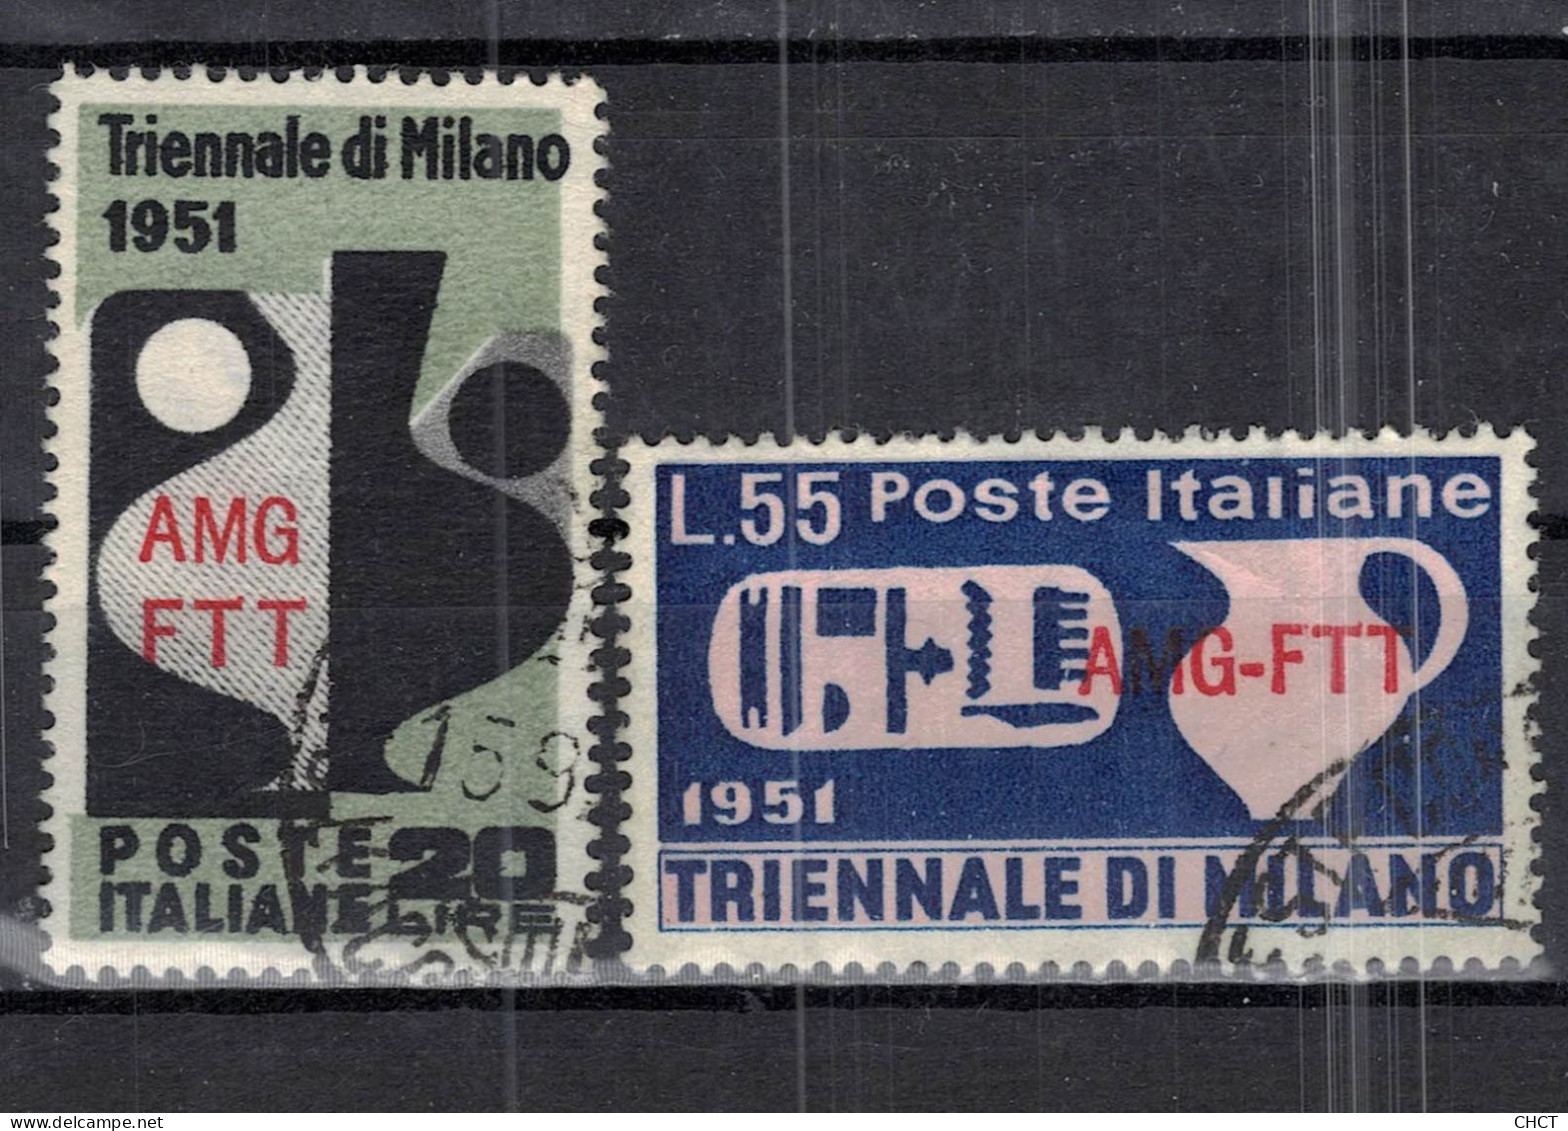 CHCT74 - Milan Triannual, Triennale Di Milano, AMG-FTT Overprint, Trieste A, 1951, Complete Series, Italy - Usados